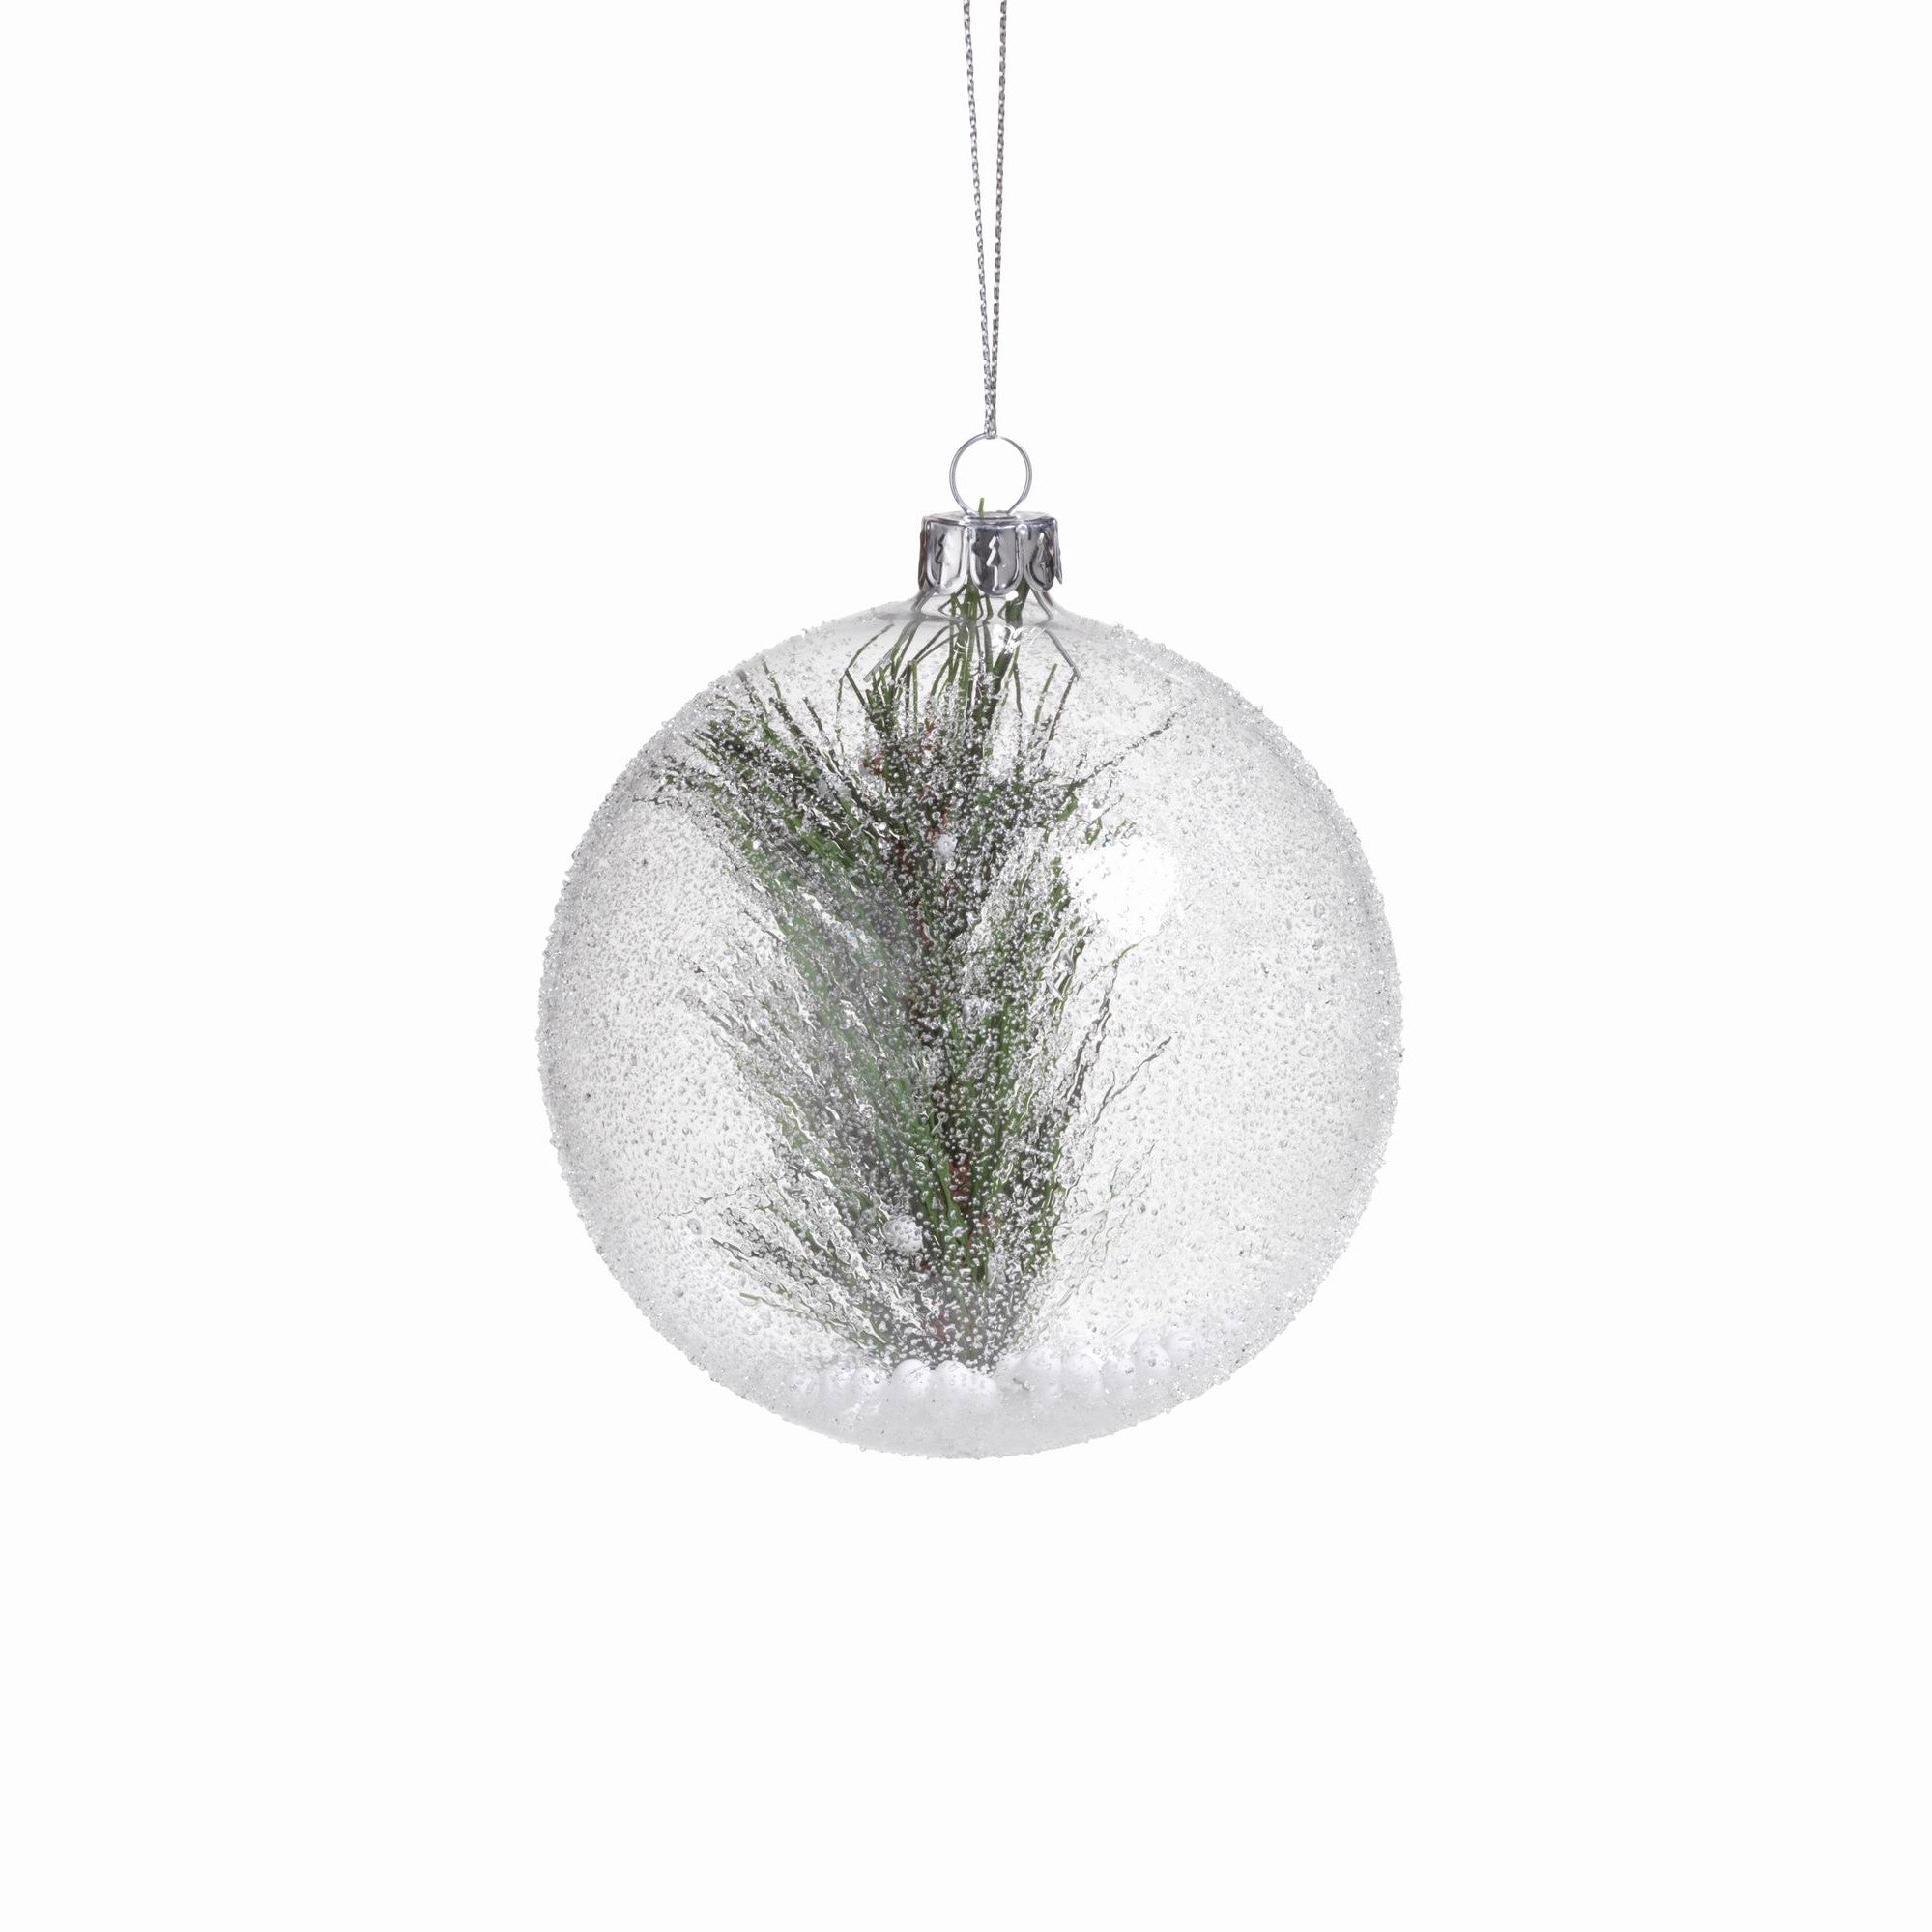 Clear Beaded Round Ornament w/ Pine Needle - CARLYLE AVENUE